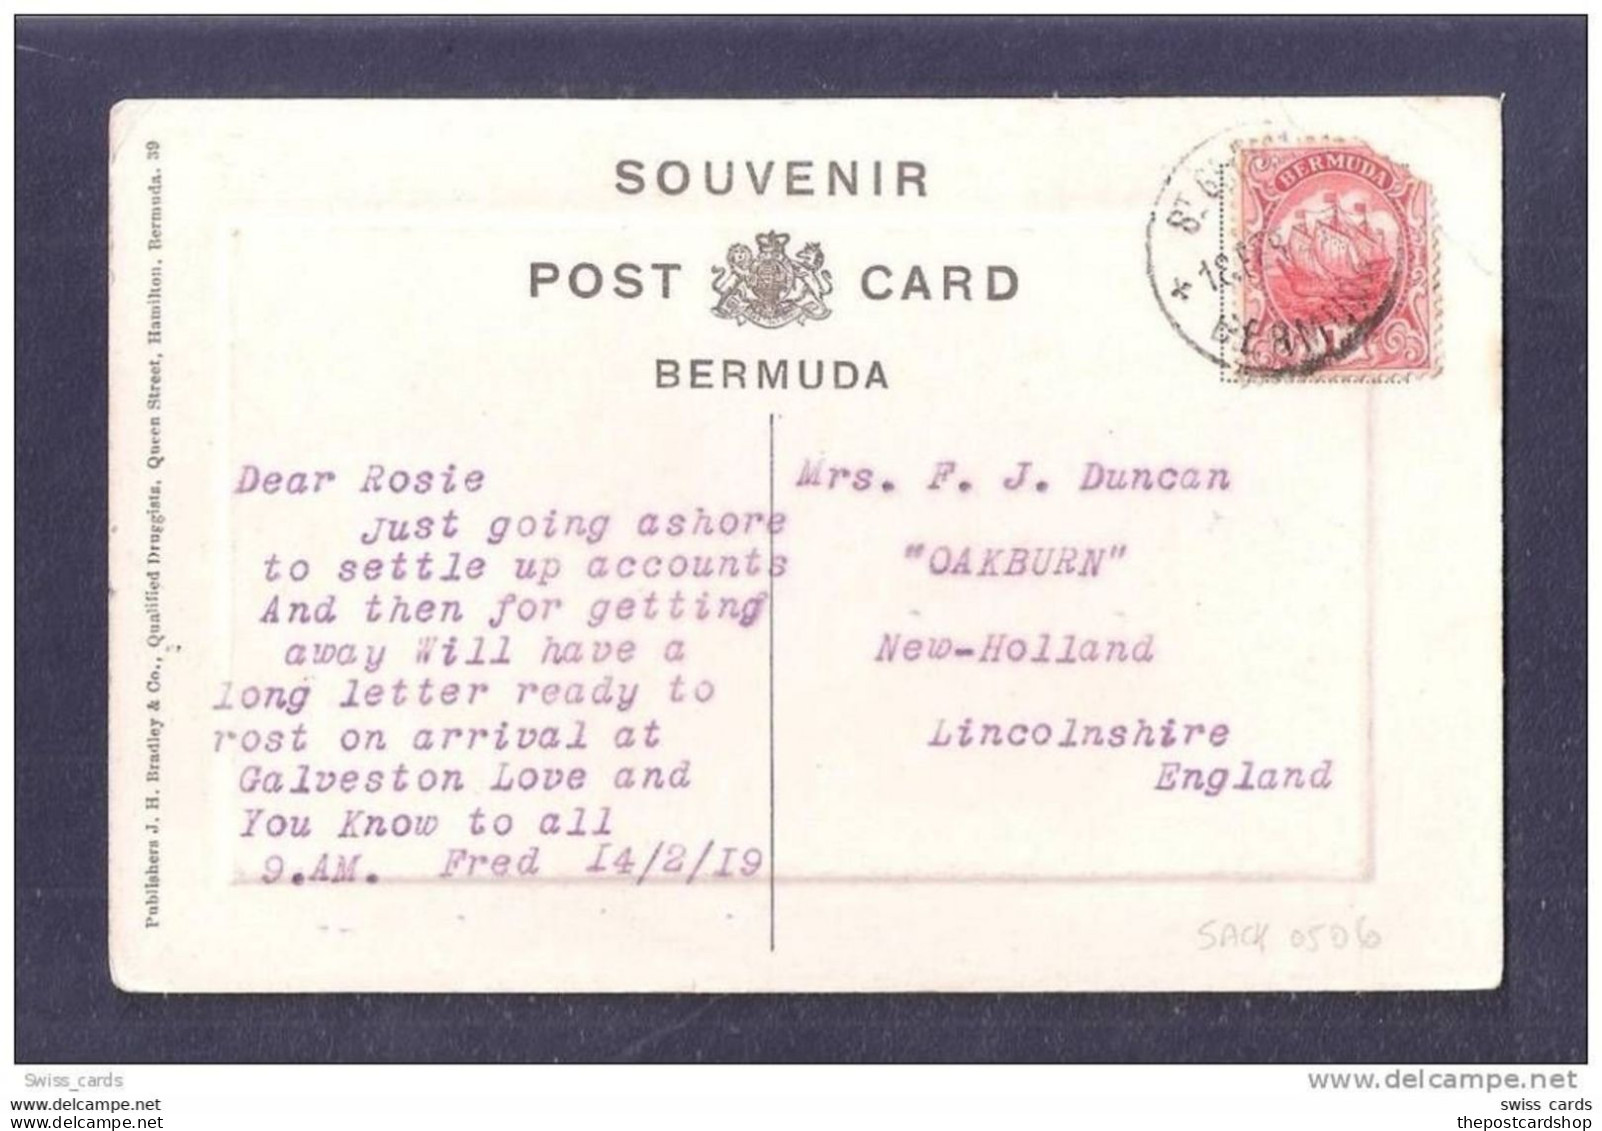 HARRINGTON SOUND Bermuda With A St Georges POSTMARK With Stamp Used 1919 INTERSTING TYPED MESSAGE - Bermuda